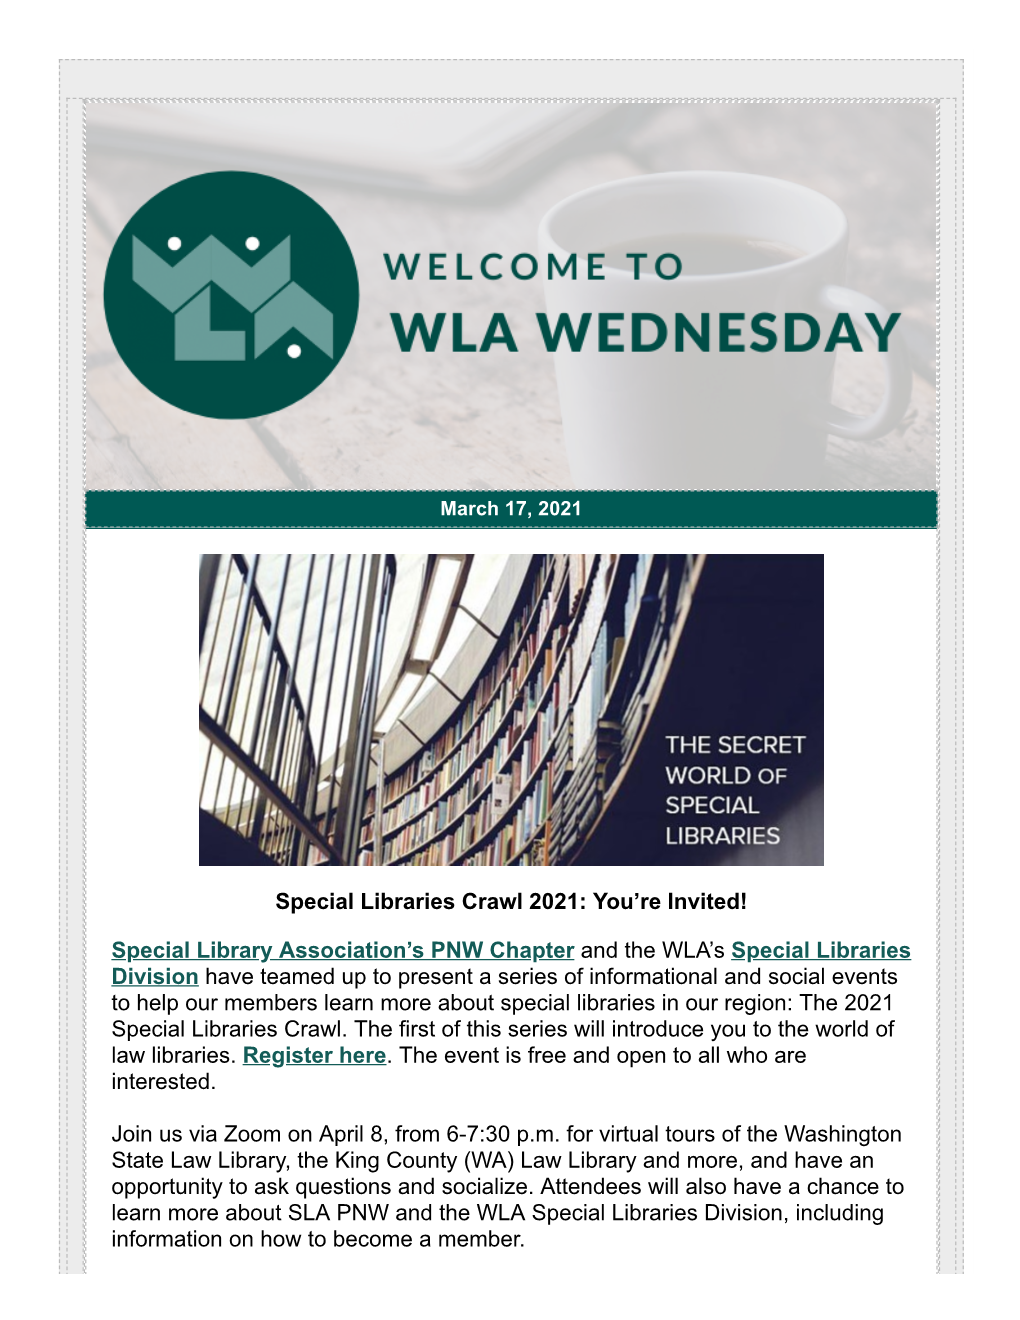 Special Libraries Crawl 2021: You're Invited!